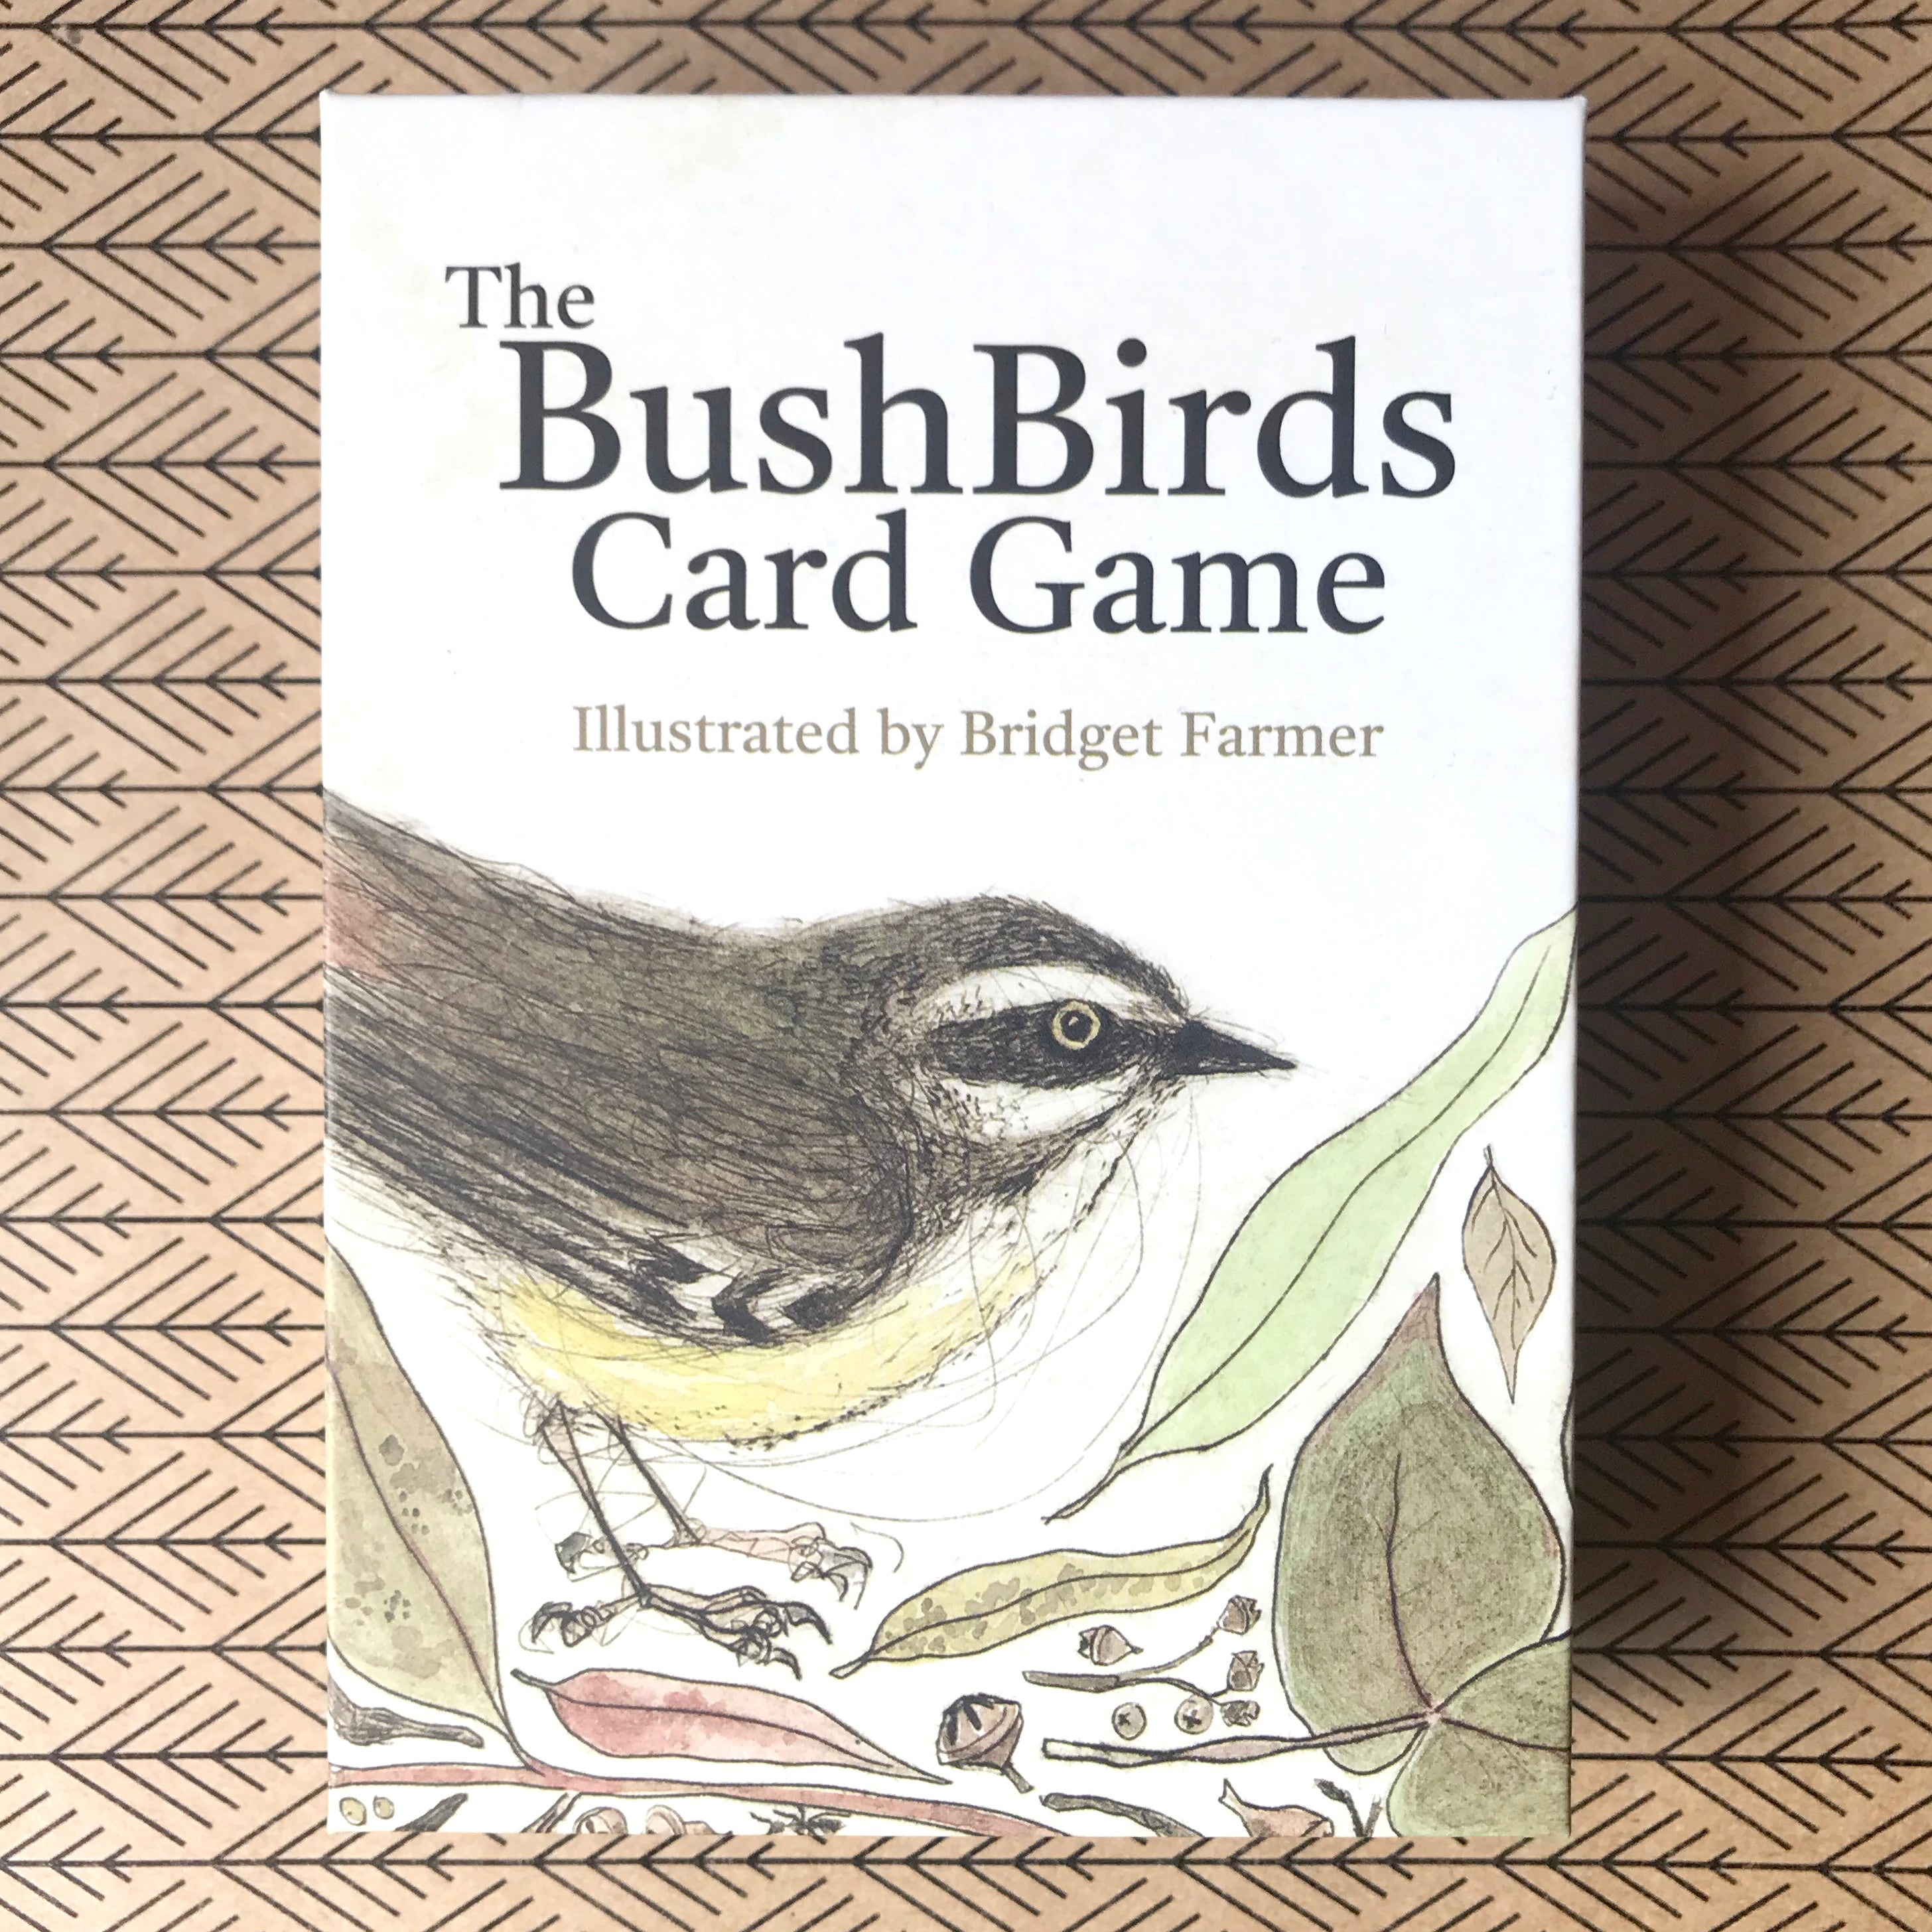 Book and Game Combo Deal - THE BUSH BIRDS